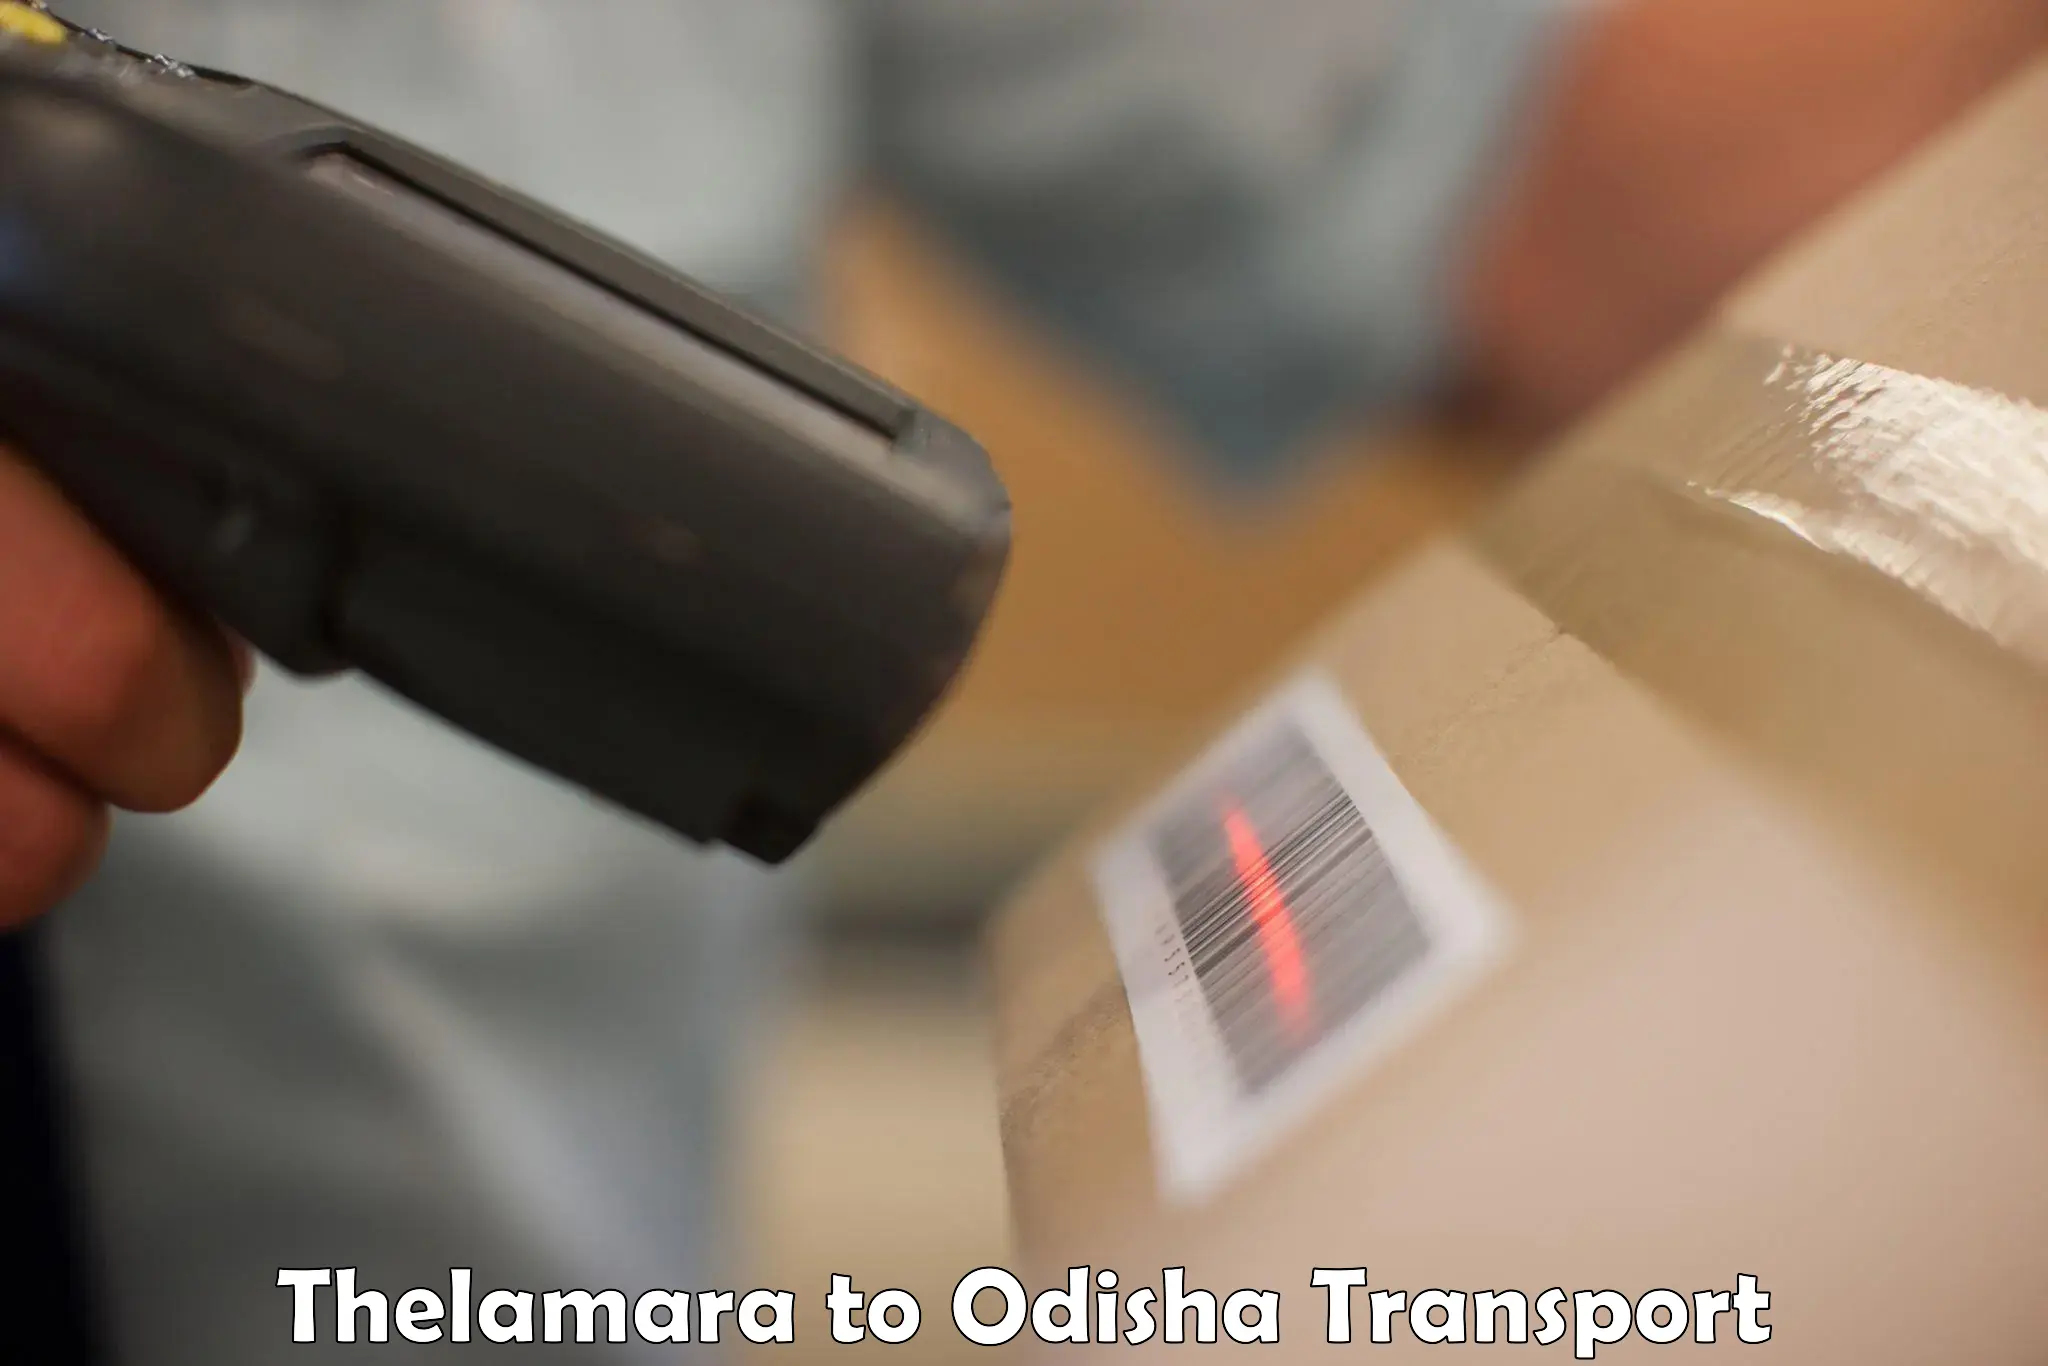 Daily parcel service transport Thelamara to Aul